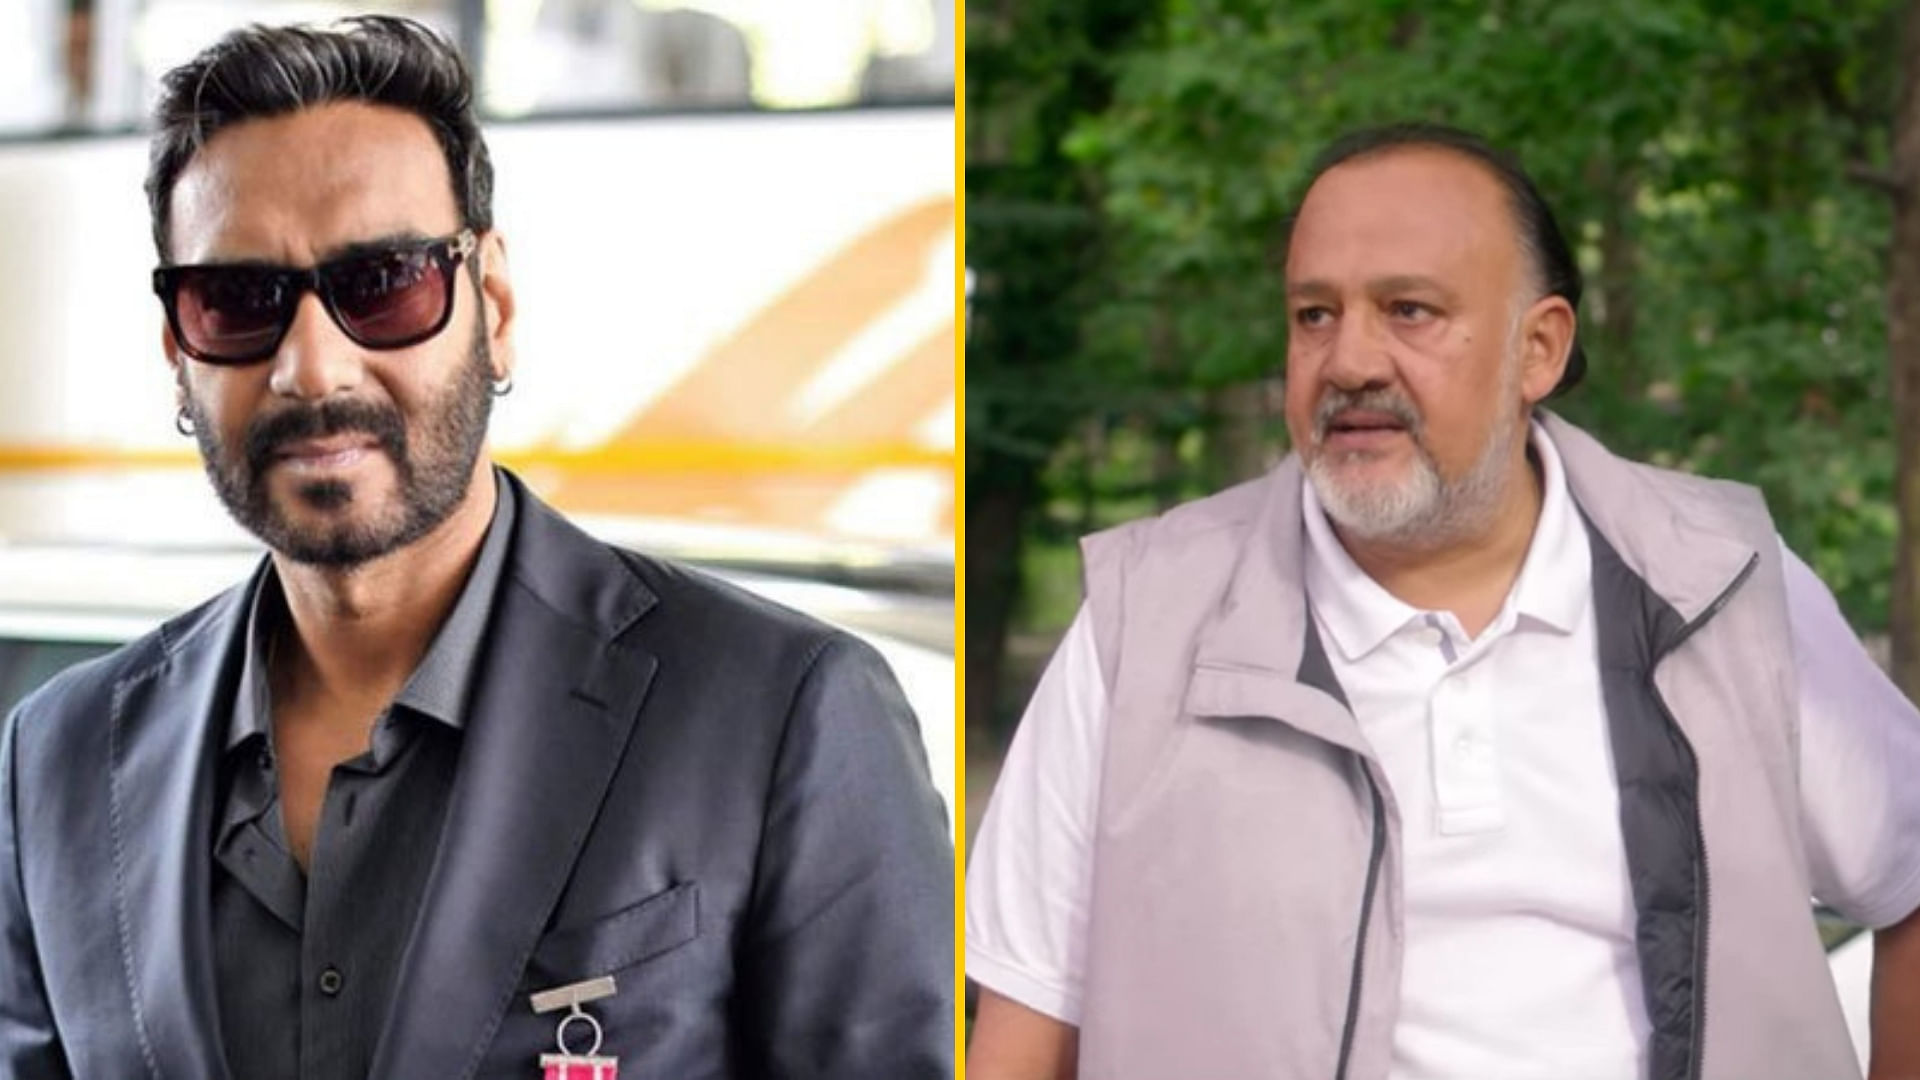 Ajay Devgn has faced criticism for working with Alok Nath, who has been accused of sexual assault.